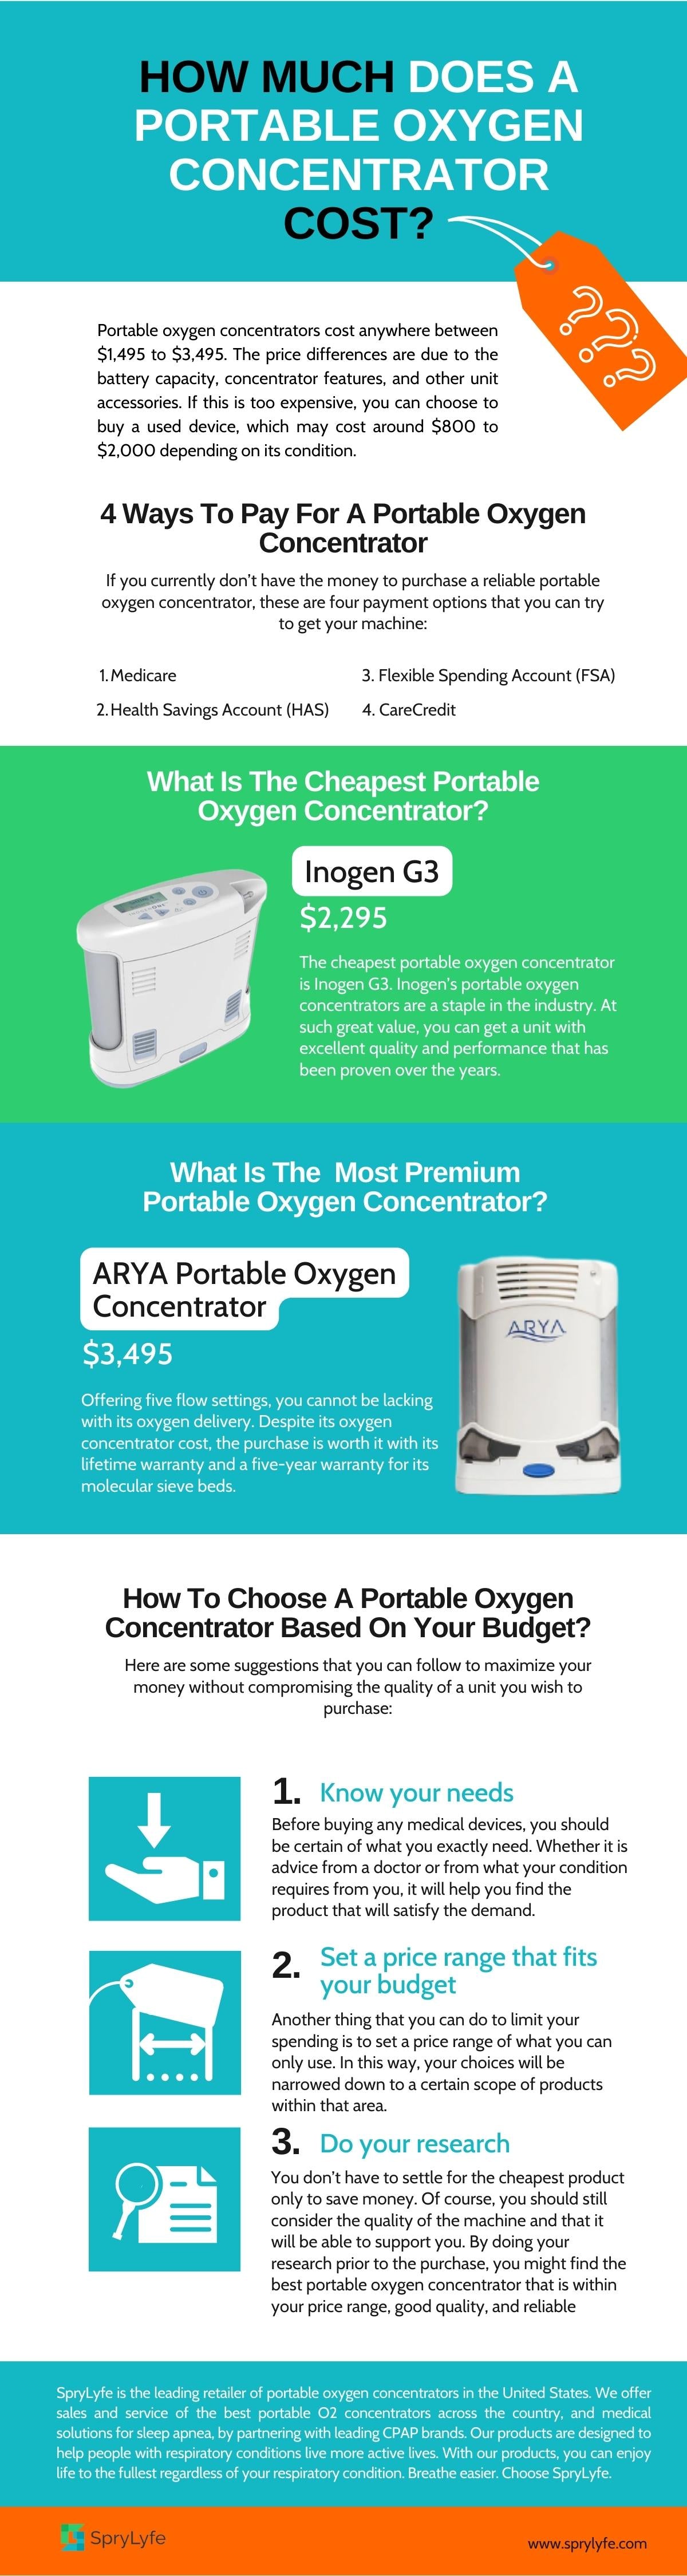 https://cdn.shopify.com/s/files/1/0076/5847/1483/files/How_Much_Does_a_Portable_Oxygen_Concentrator_Cost_-_Sprylyfe_infographic.jpg?v=1664188597